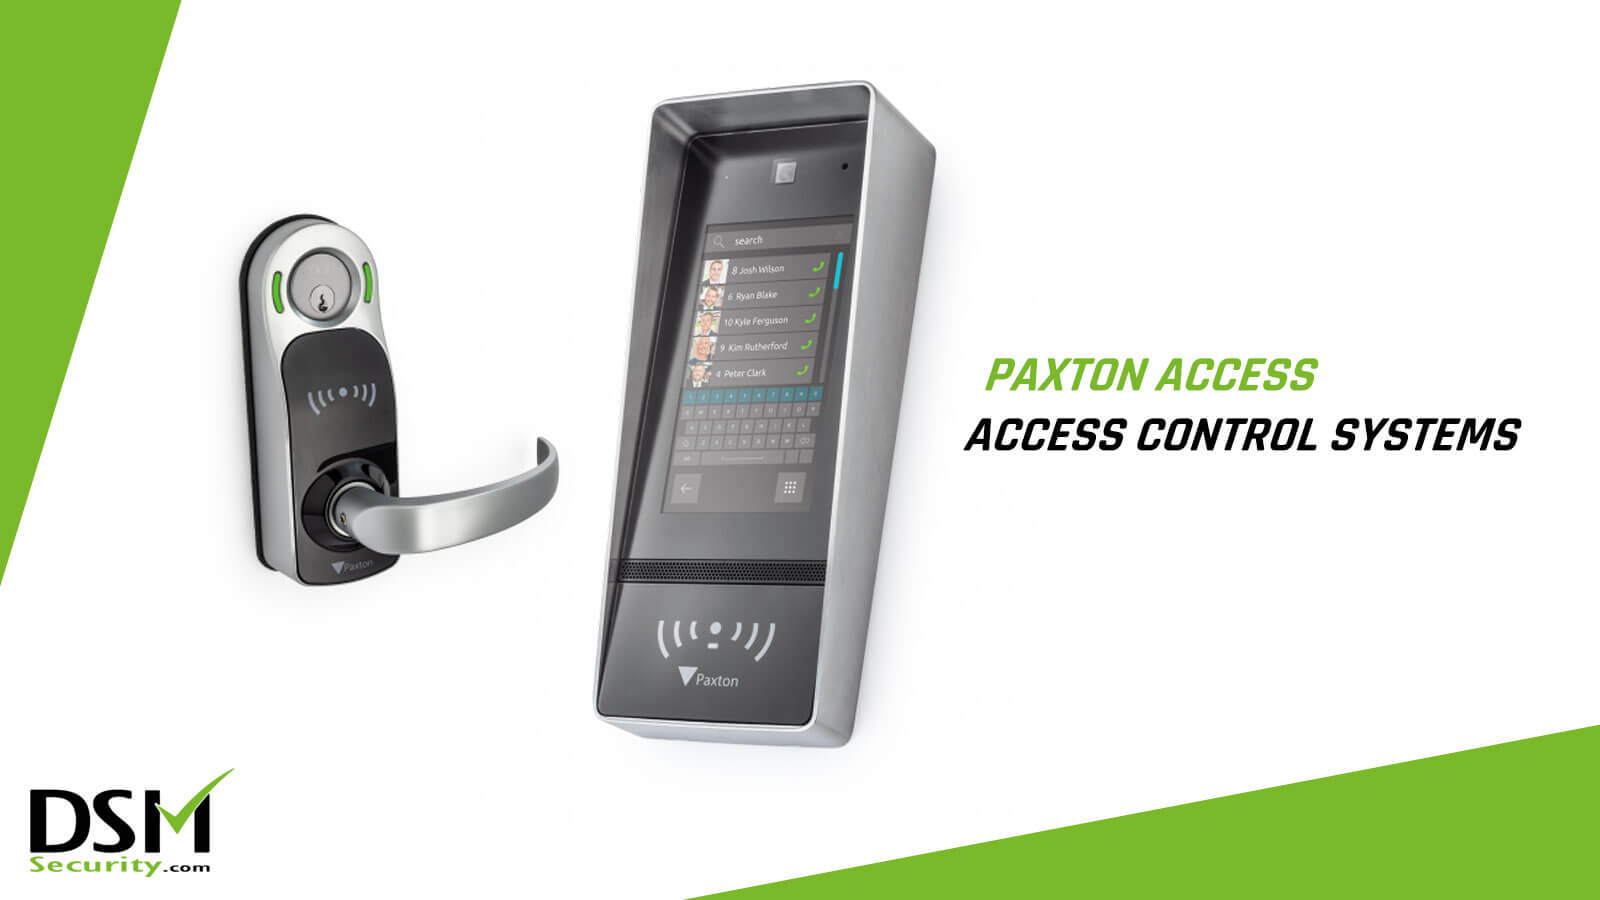 Paxton Access Control System by DSM Security in Edinburgh